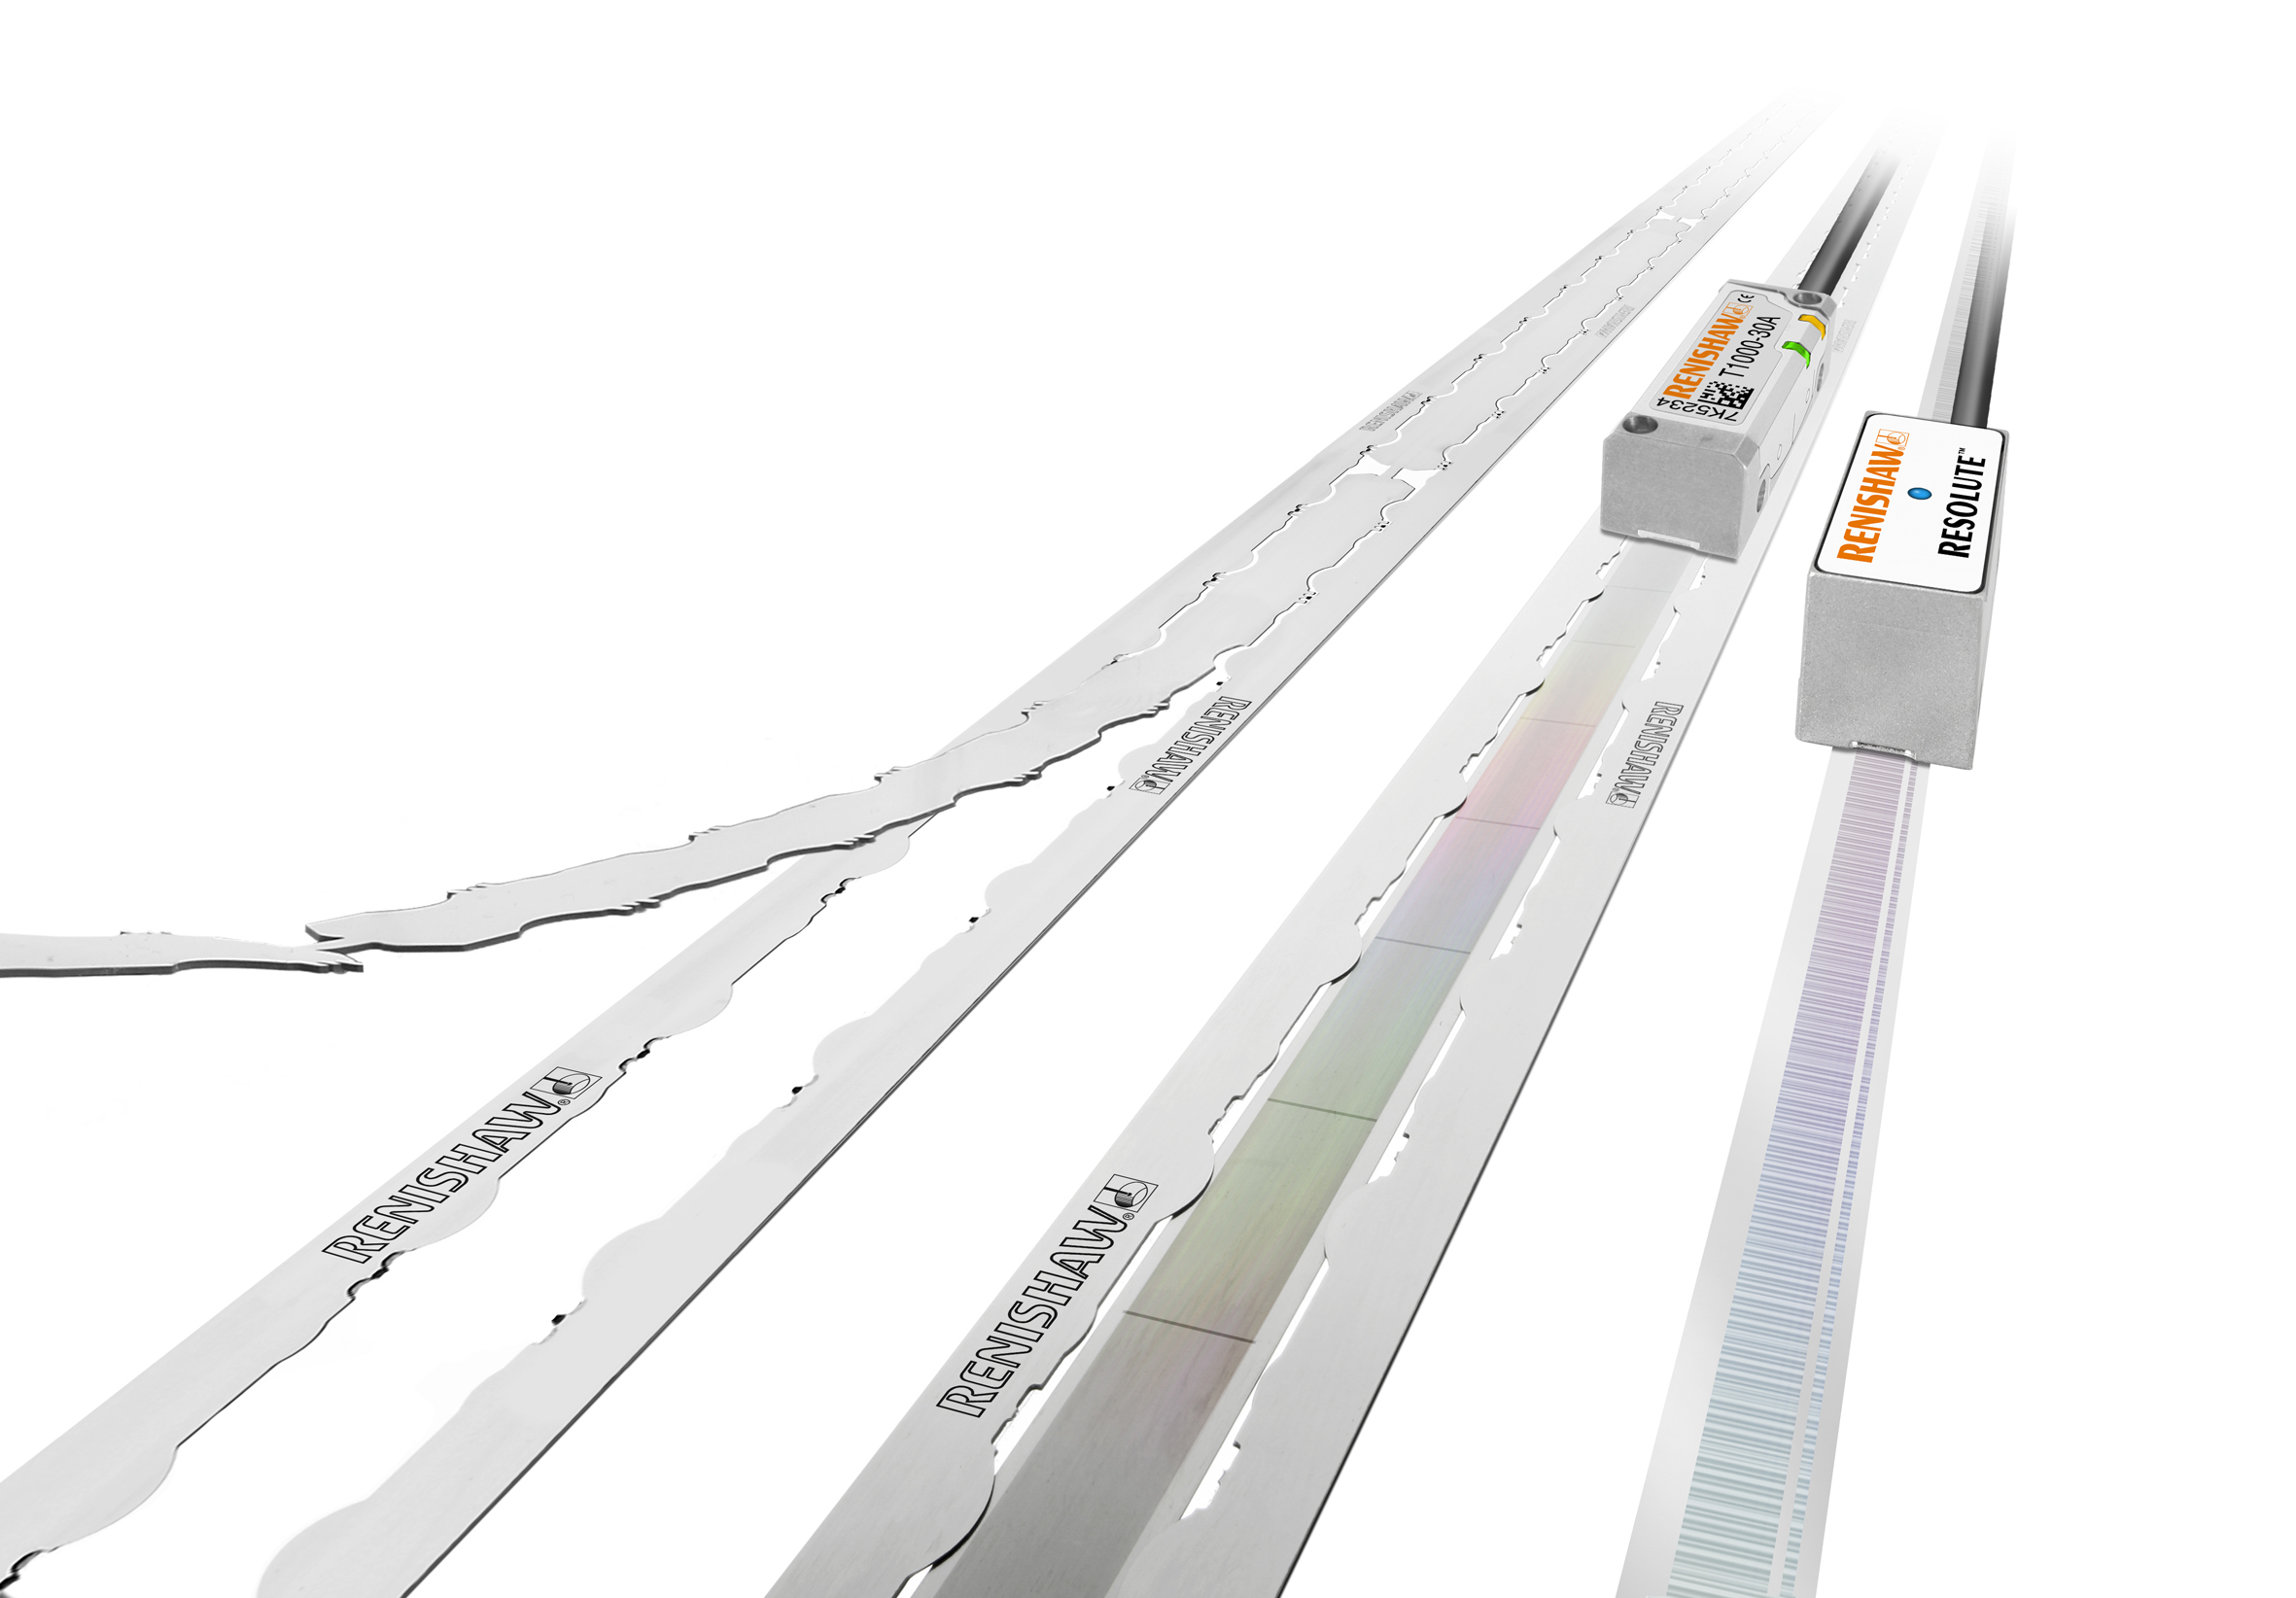 New FASTRACK™ linear encoder scale system combines high accuracy, tape